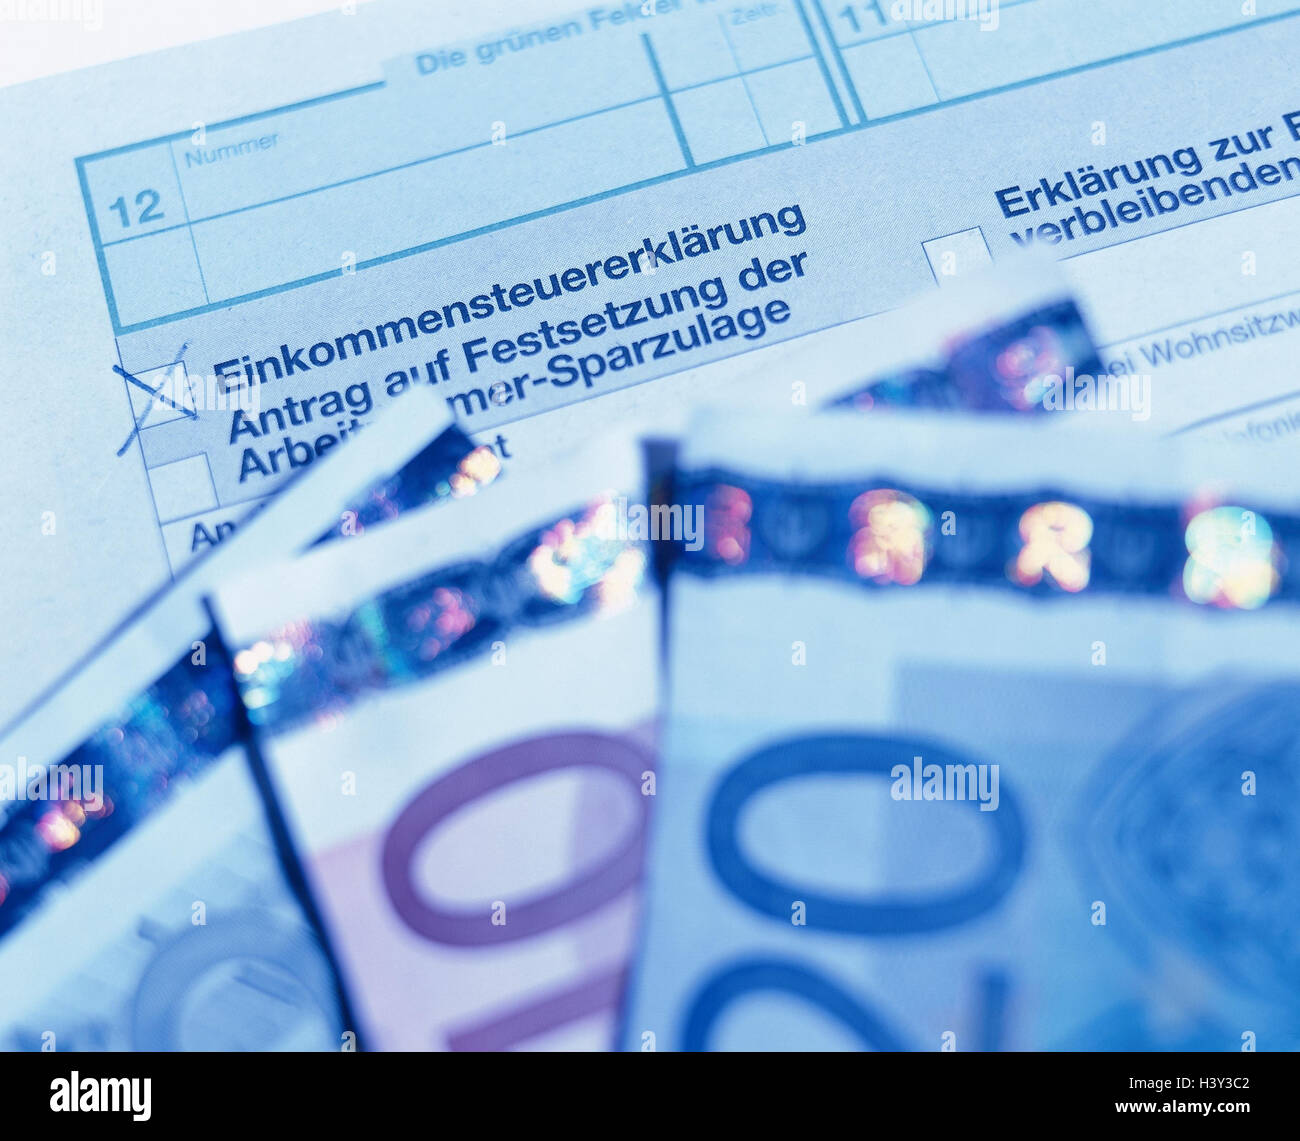 Tax return, form, banknotes, euro bank notes, money, cash, tax, reward tax, income statement, document, document, tax office, income tax, Still life, product photography Stock Photo